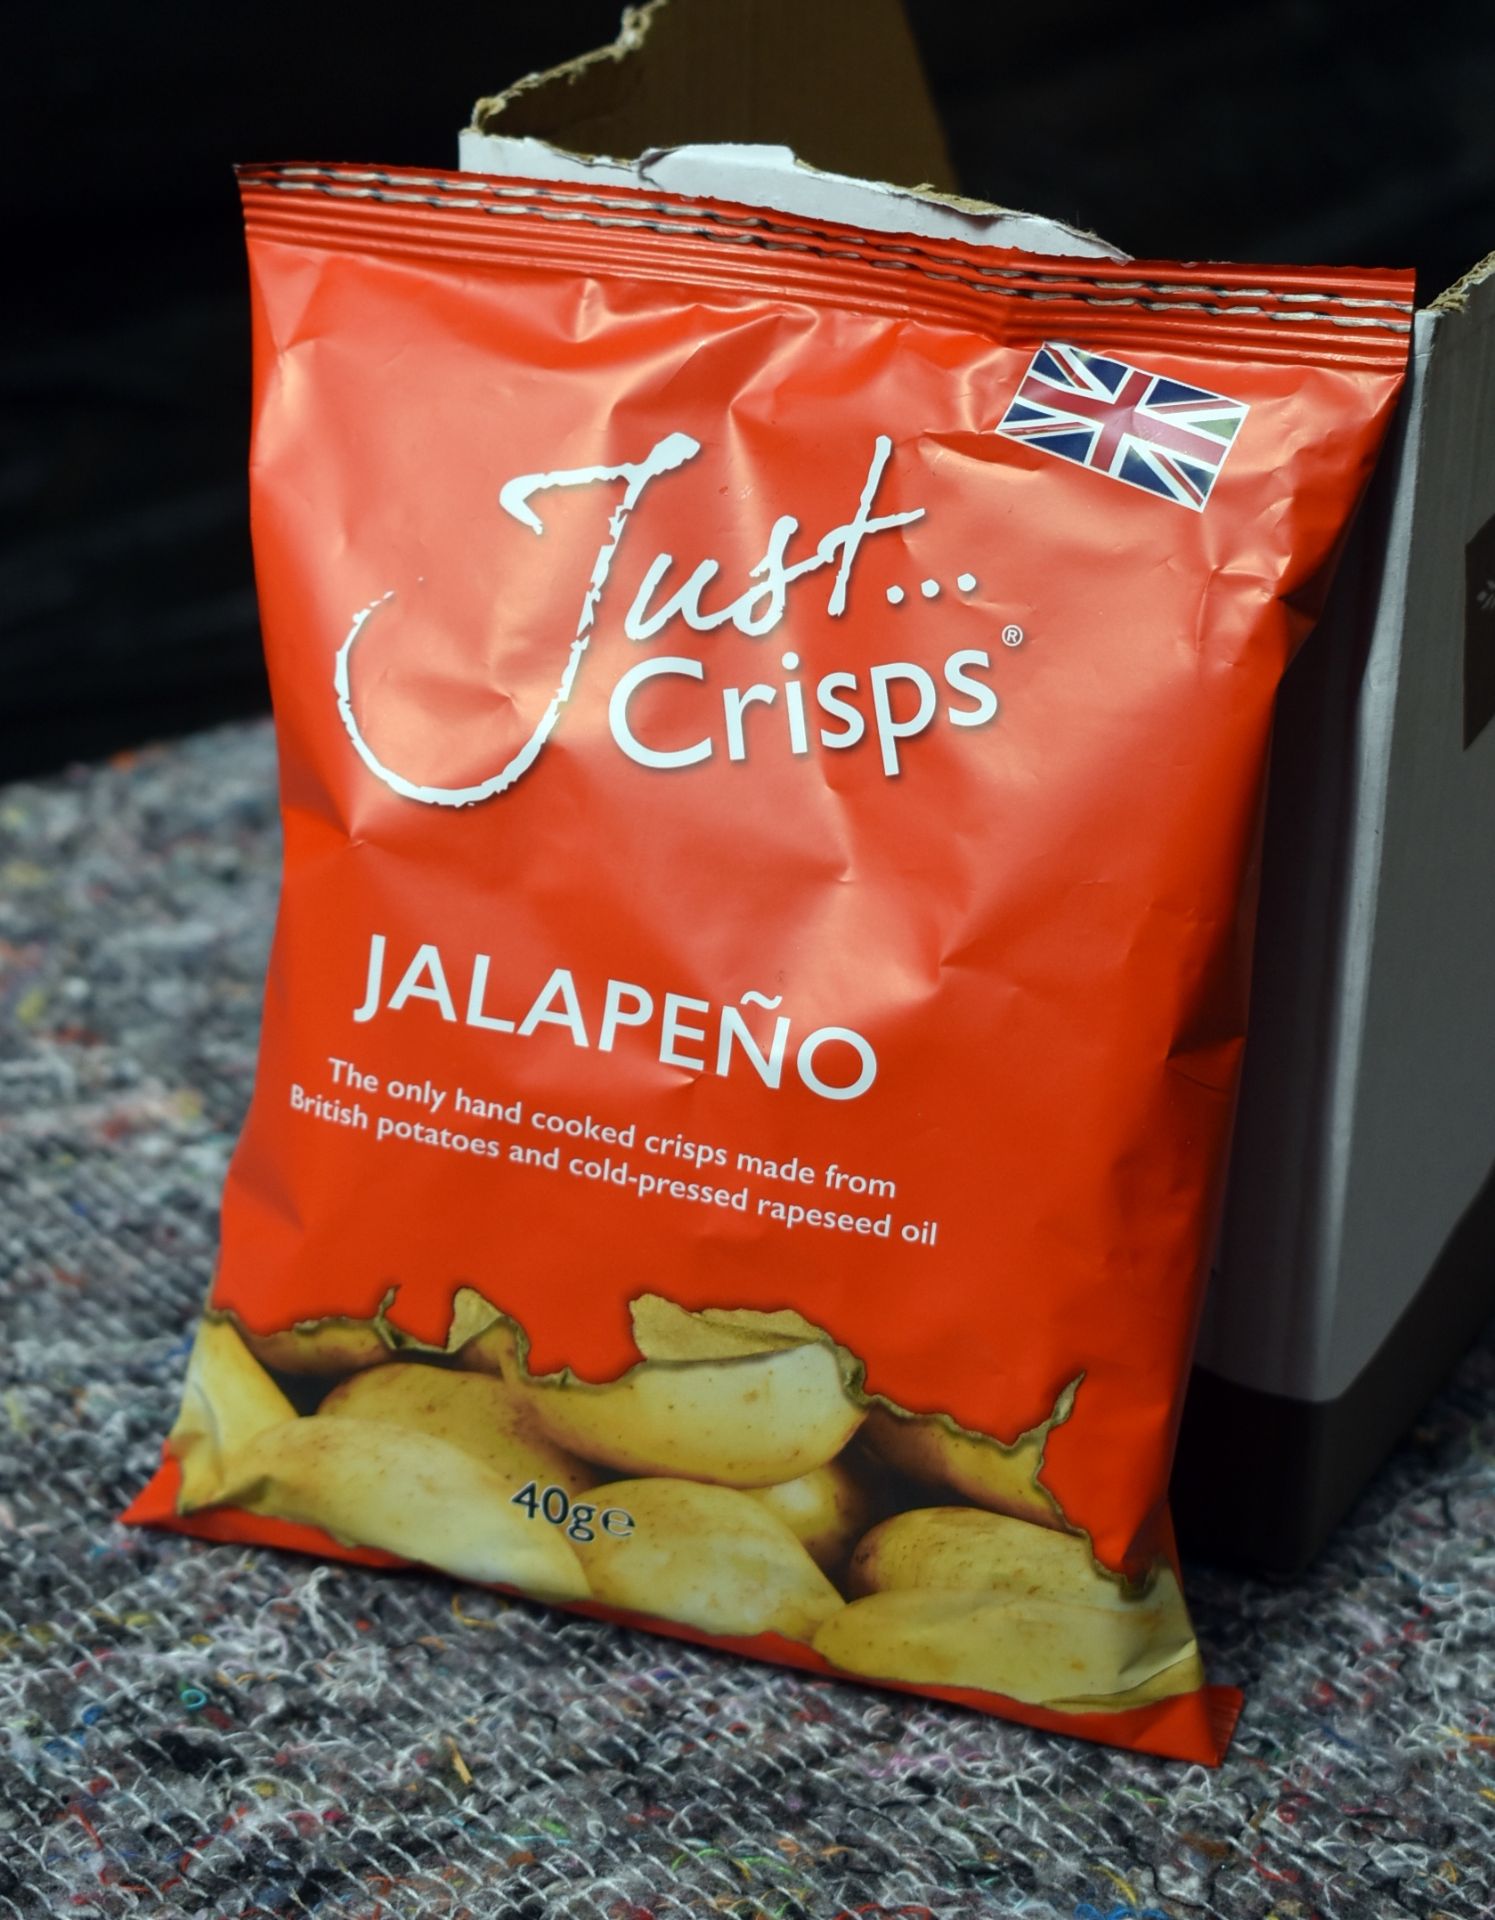 36 x Assorted Consumable Food Products Including Bags of JUST Flavoured Crisps- Ref: TCH405 - - Image 15 of 23